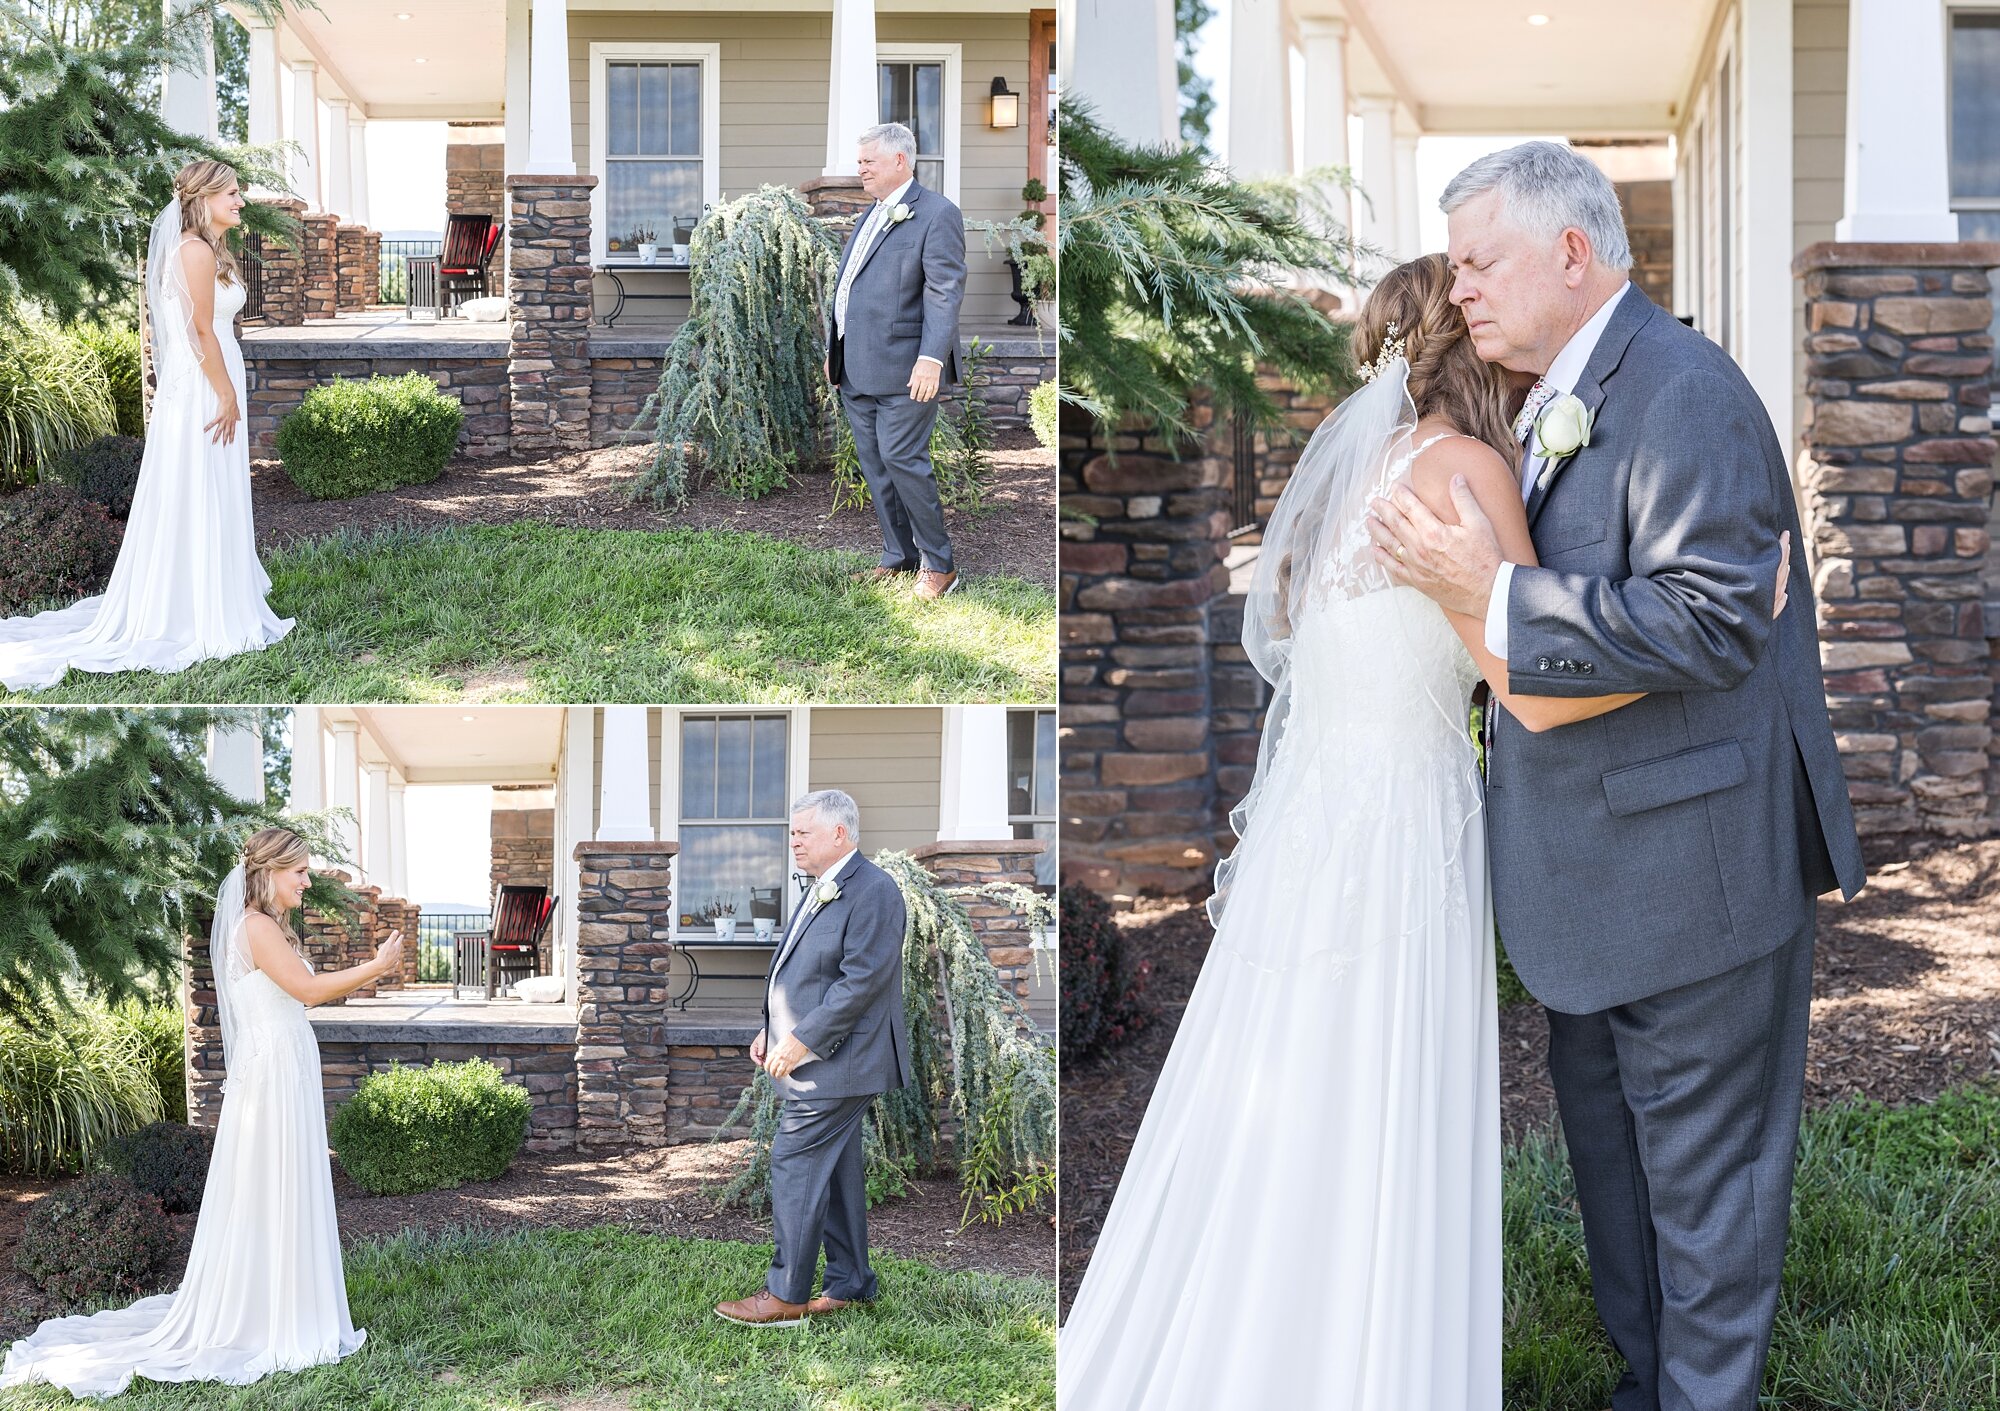  This first look was so sweet between Sara and her dad! 